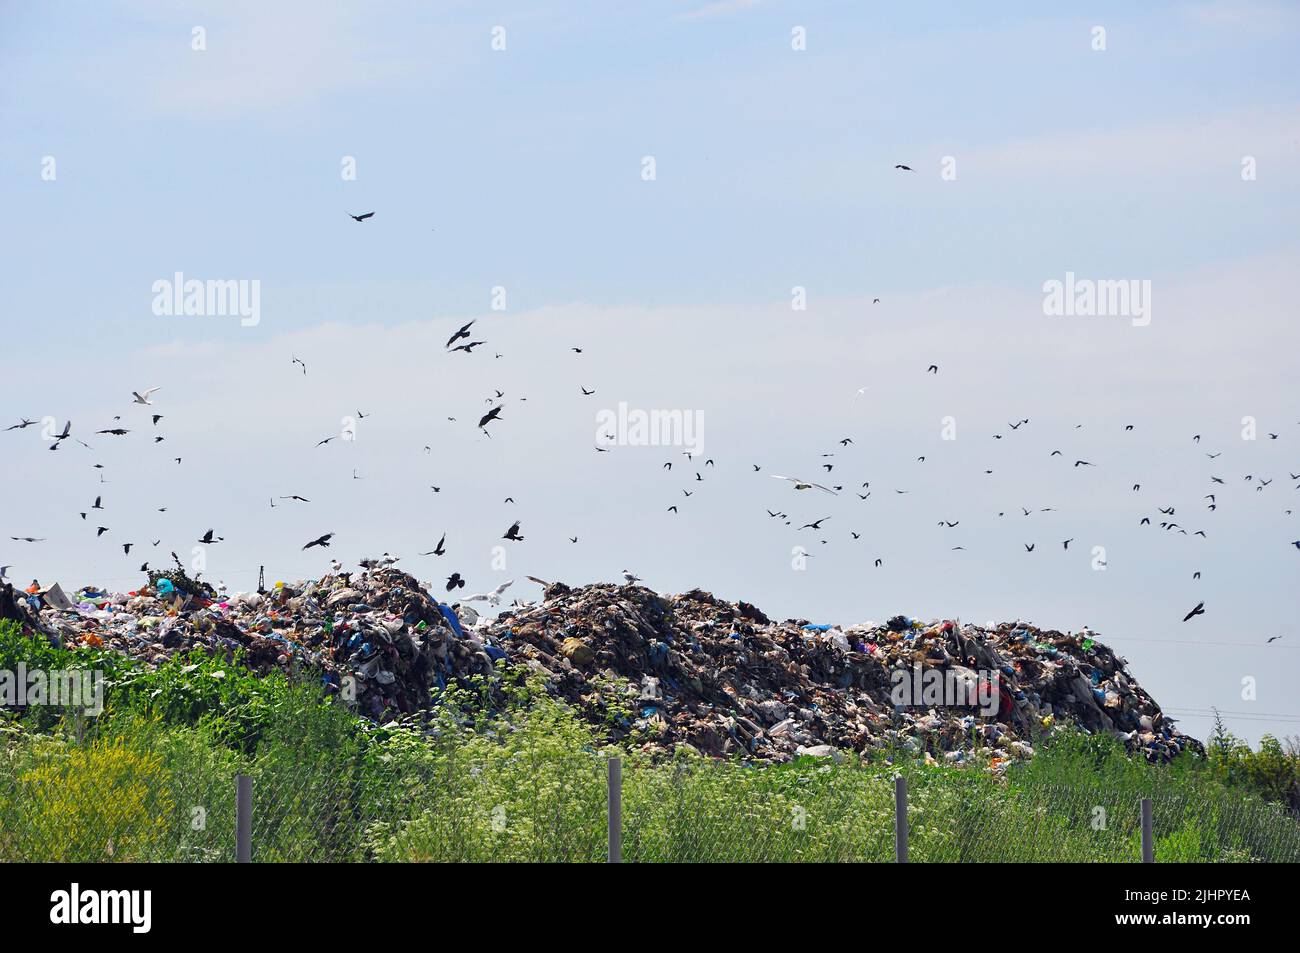 Dozens of seagulls and rooks flying over the garbage heaps in the municipal landfill against a blue sky Stock Photo